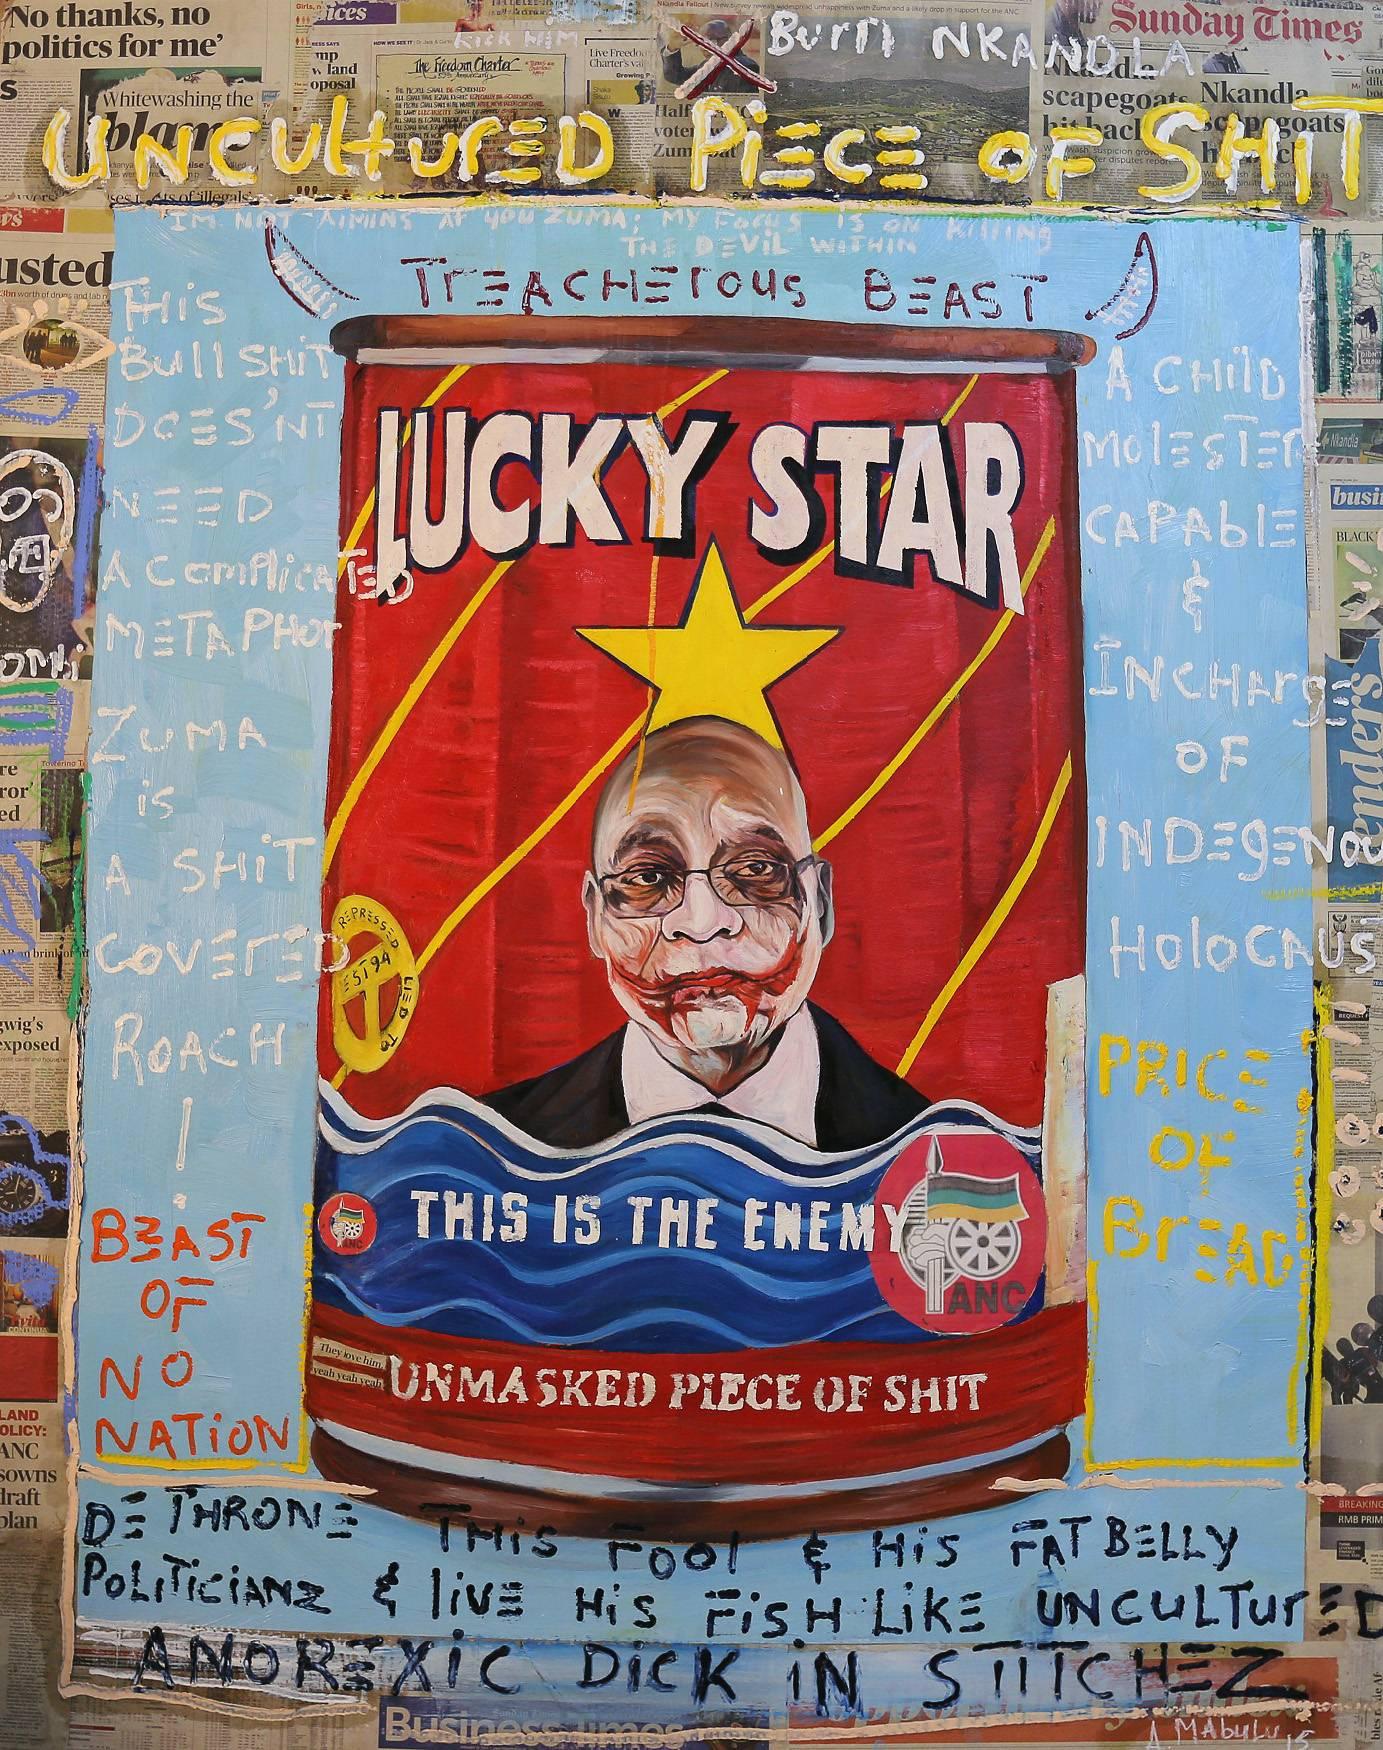 The Lucky Star series represent a visual tantrum. The figures of Mandela and Zuma in the series represent the South African government in their largesse, while purporting to be representing the most vulnerable of the disadvantaged under Apartheid.